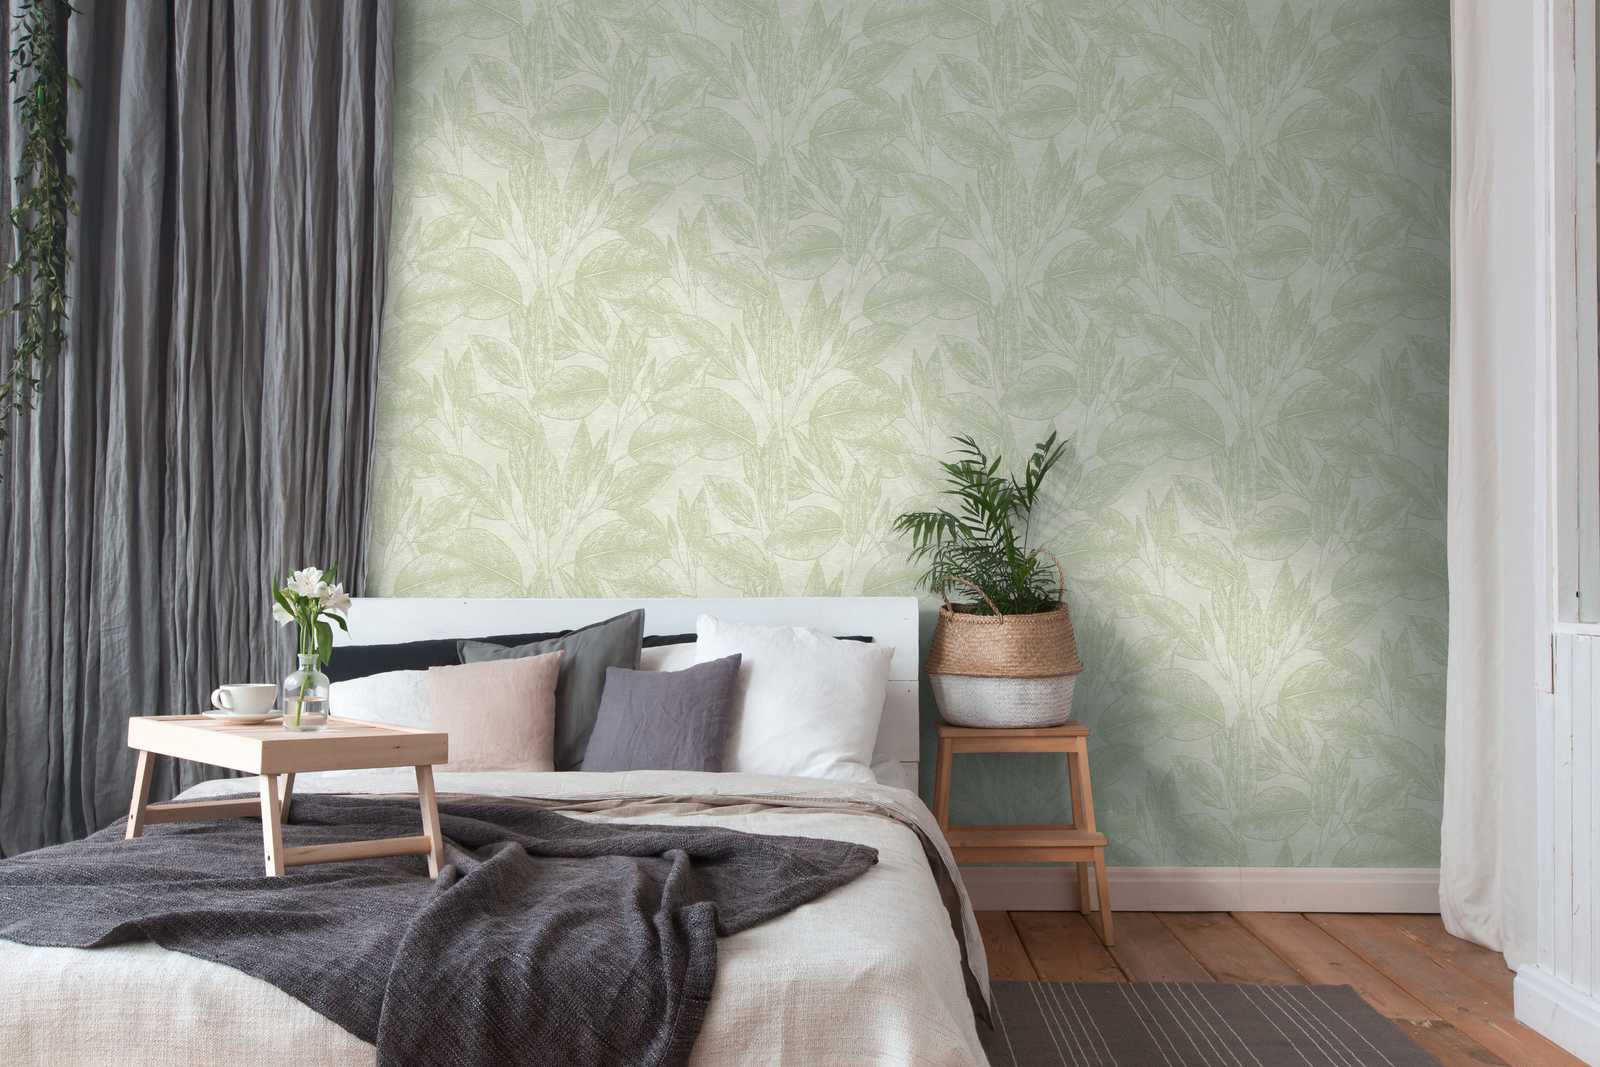             Nature non-woven wallpaper with leaves & texture pattern - green
        